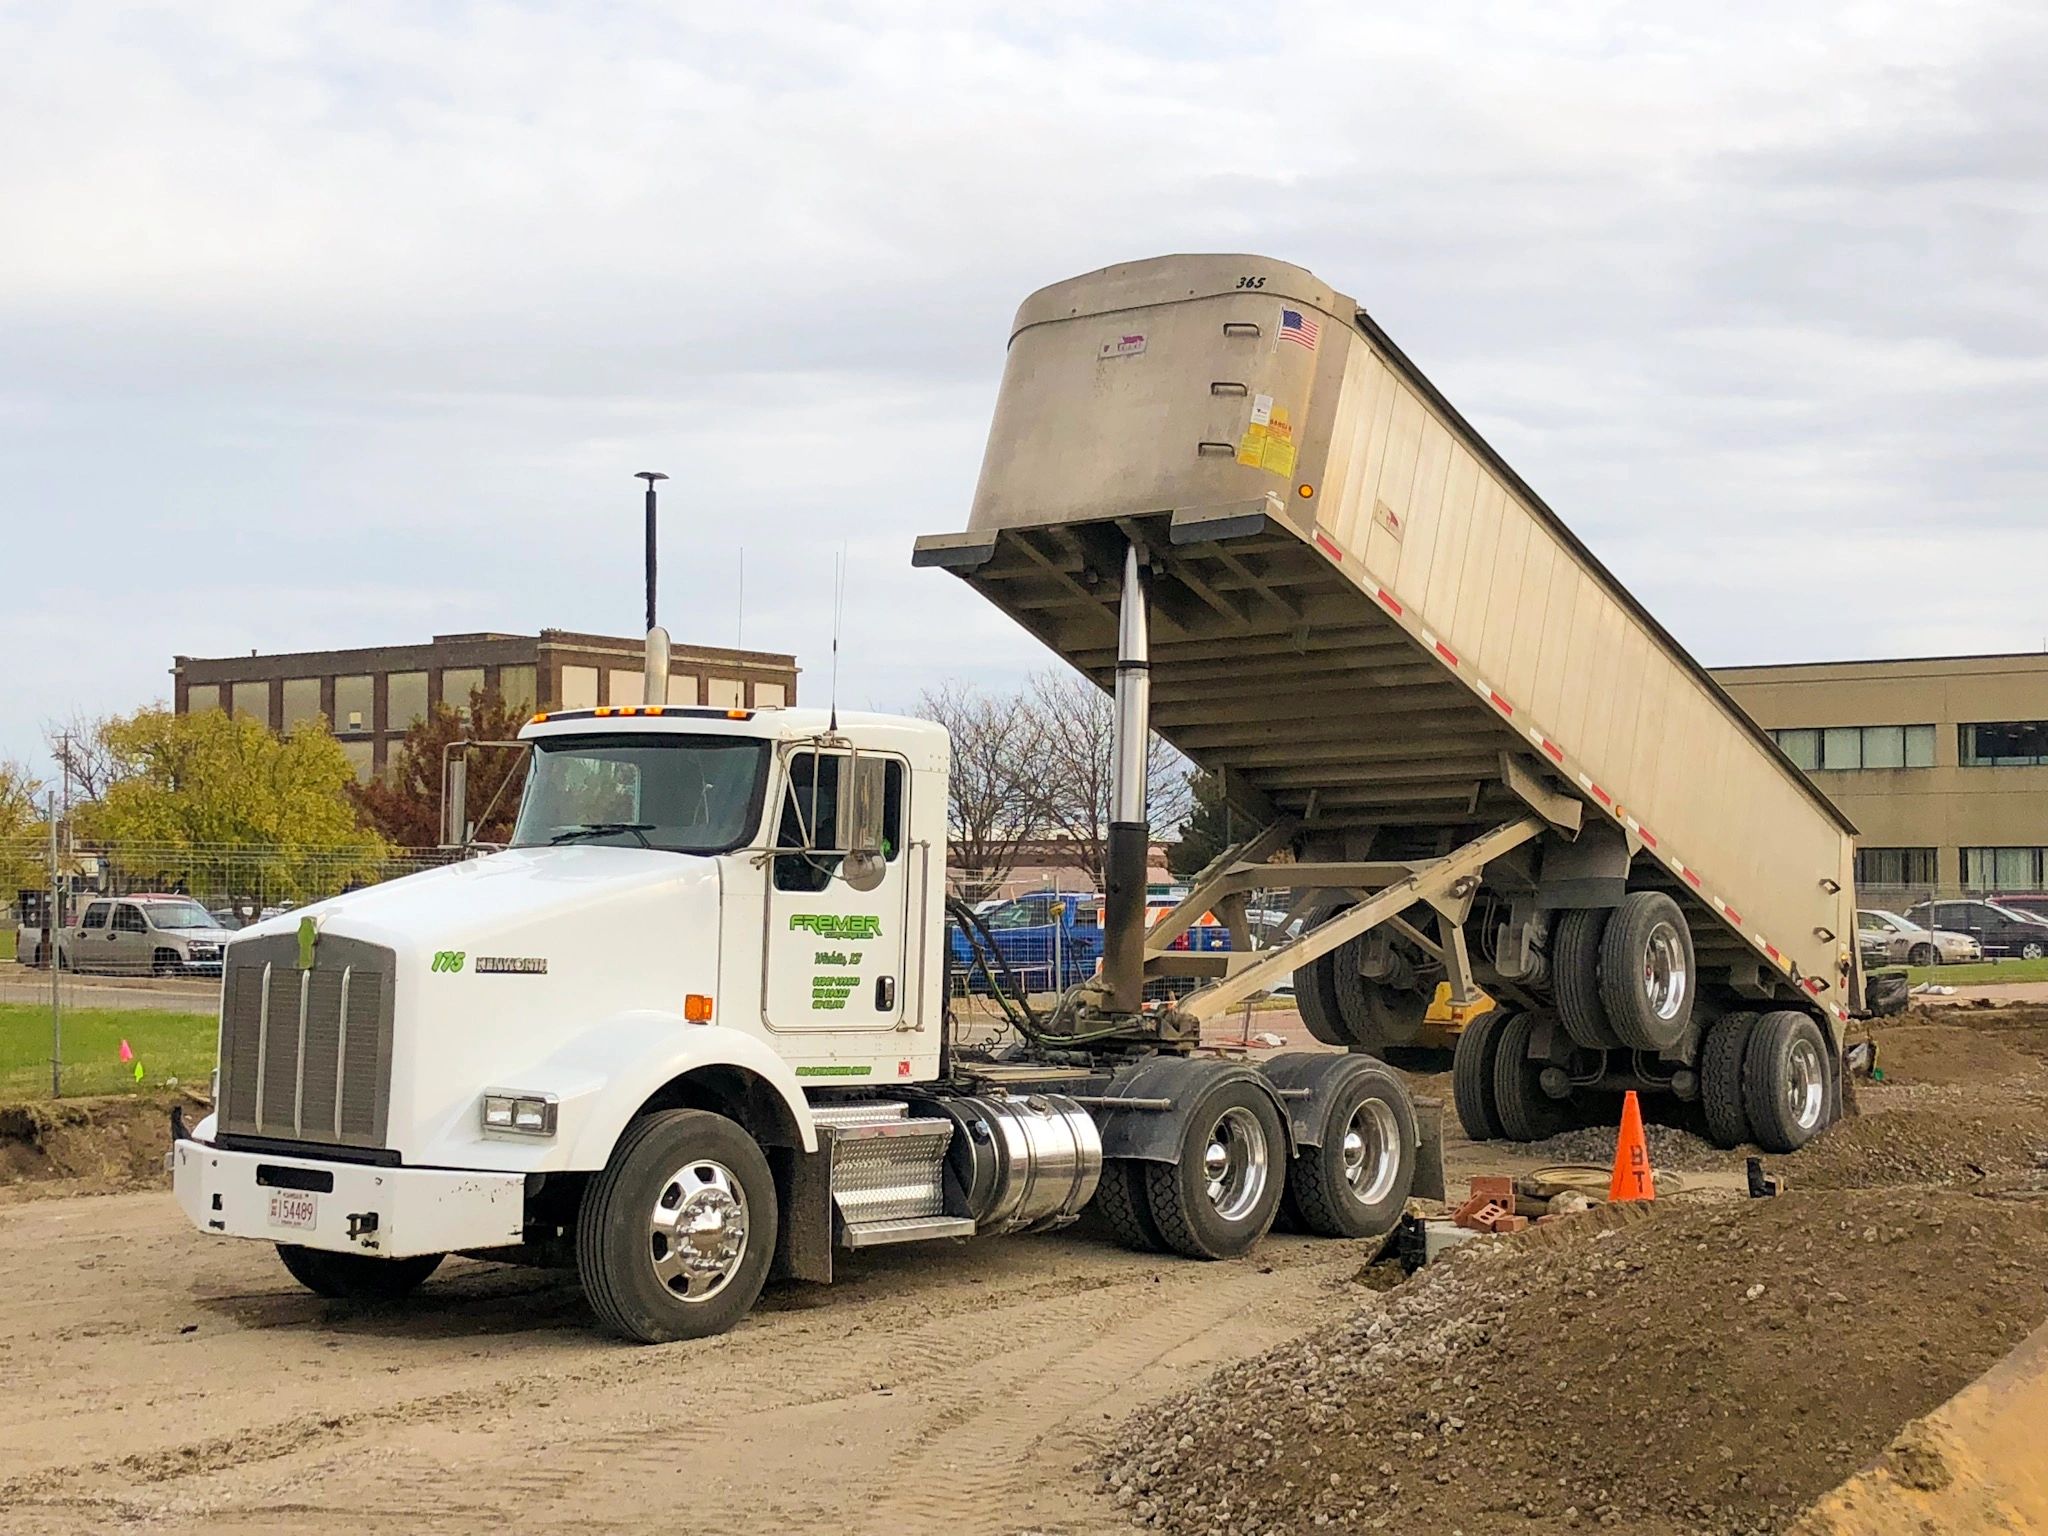 Central Sand works with Fremar Trucking to pick up and deliver materials throughout Kansas.